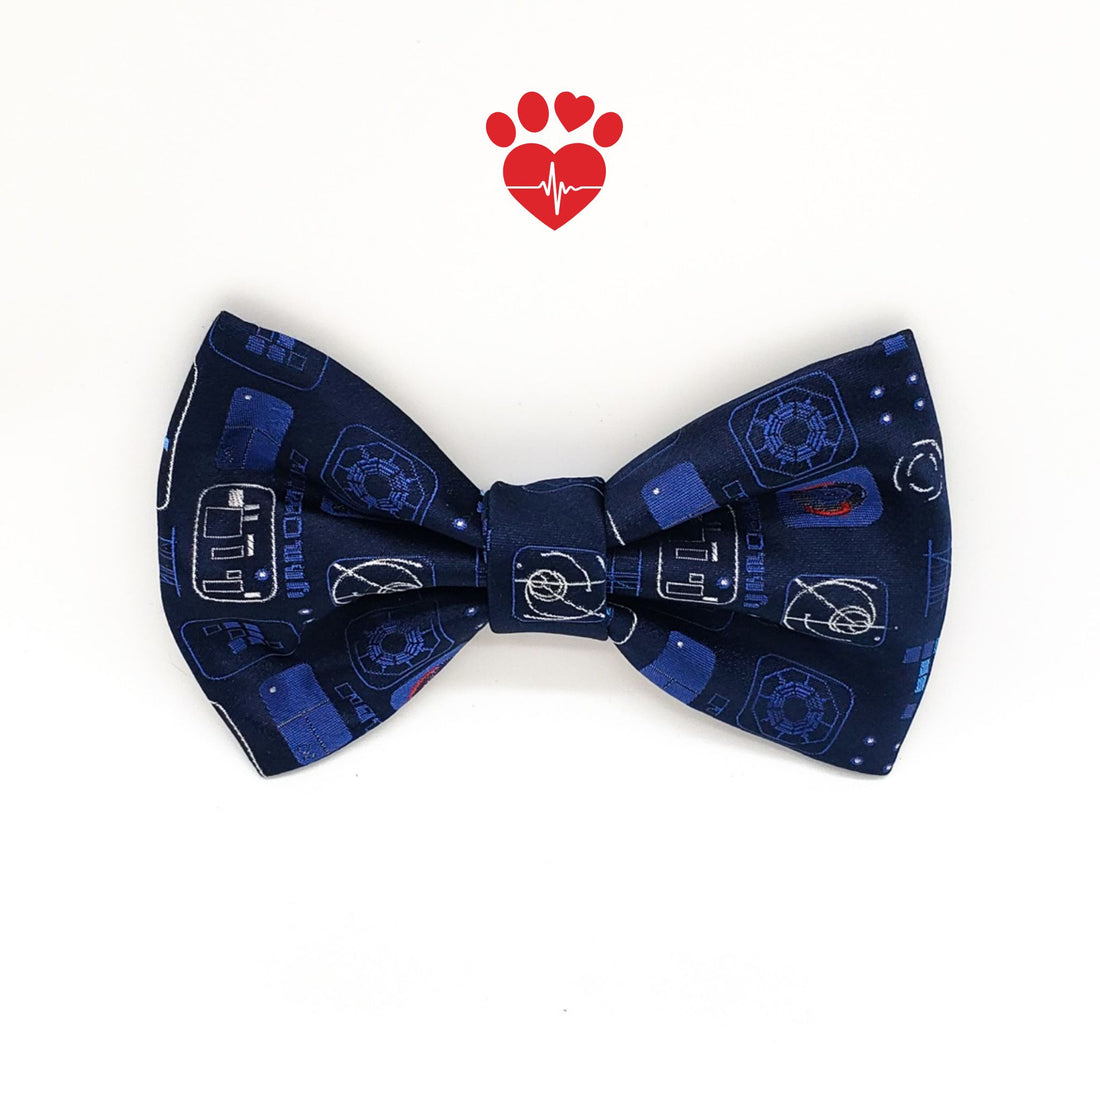 Upcycled Navy and White Control Panel silk dog bow tie. - Life Has Just Begun